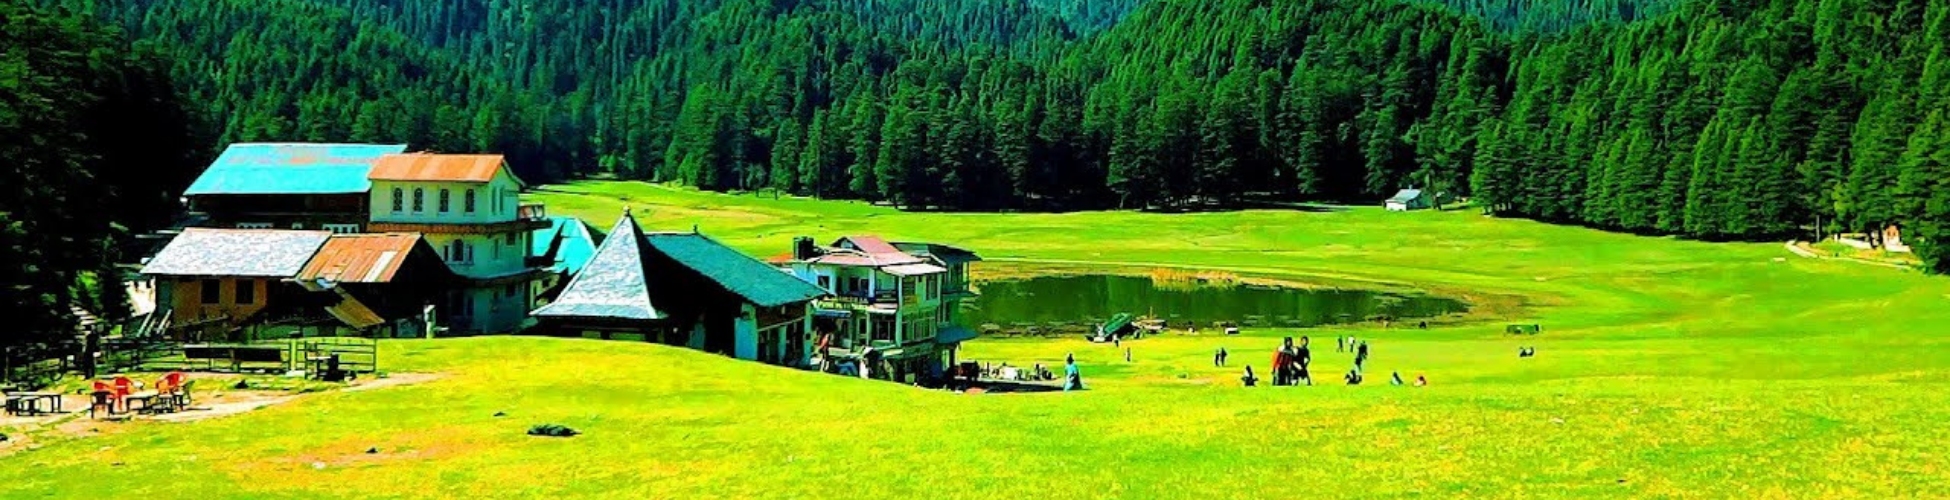 Best 10 Days Himachal Family Tour Package